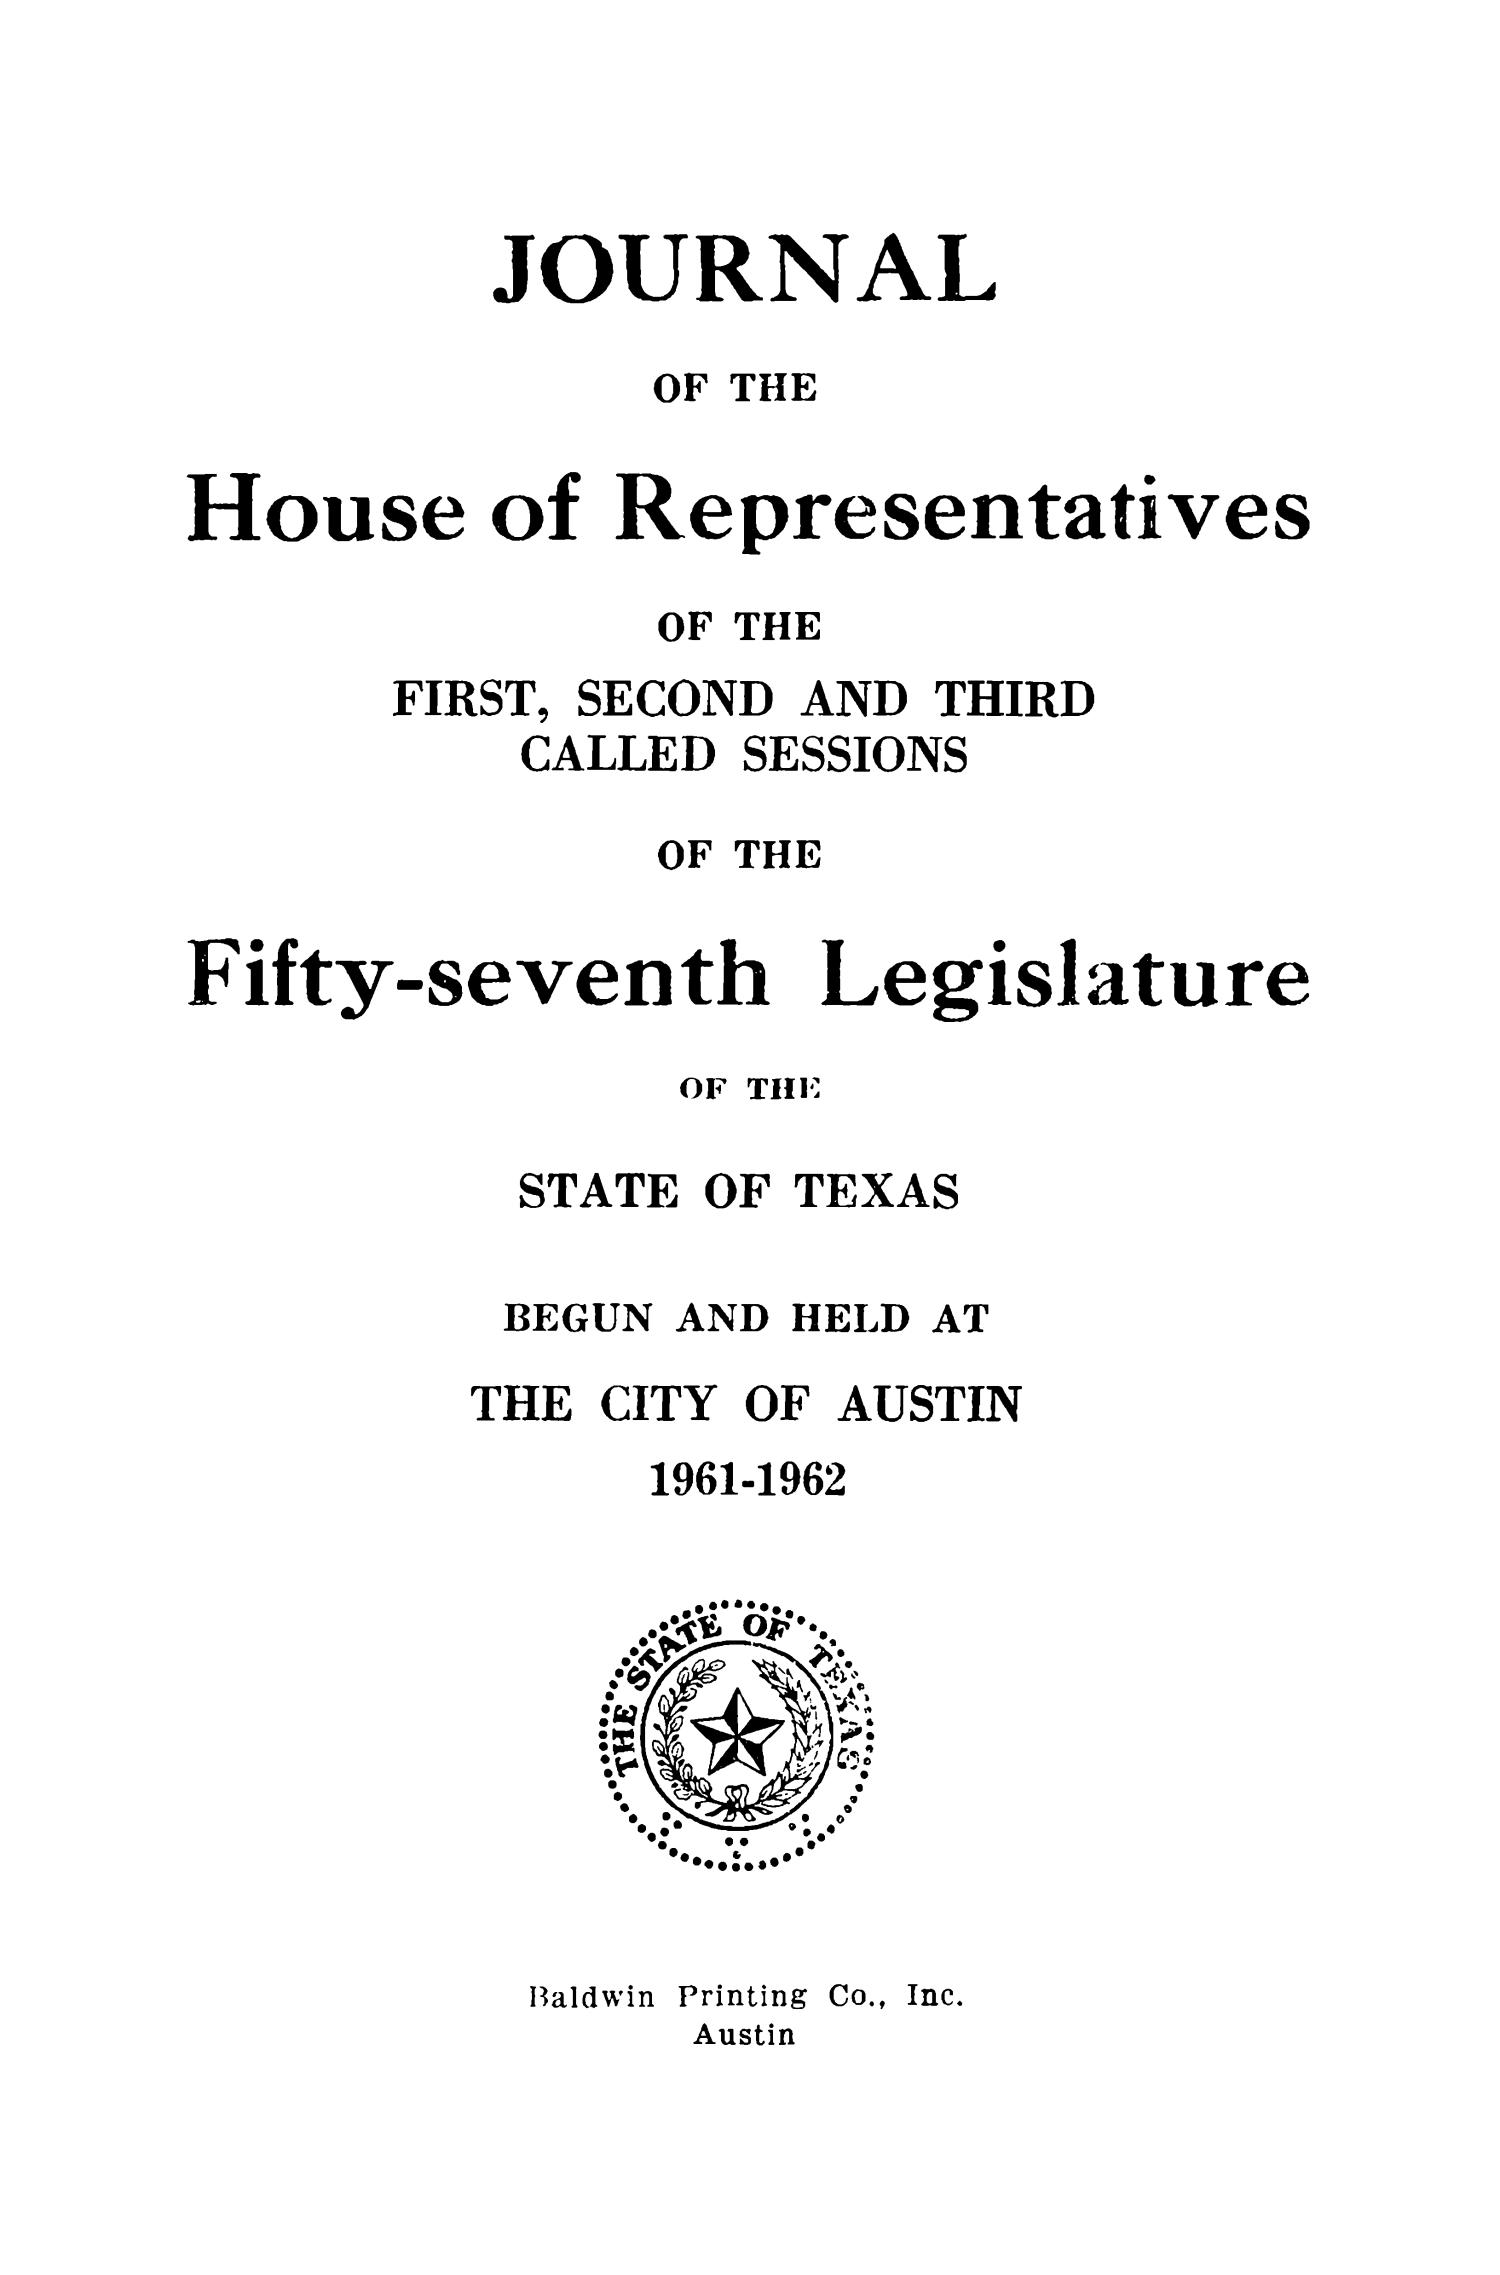 Journal of the House of Representatives of the First, Second, and Third Called Sessions of the Fifty-Seventh Legislature of the State of Texas
                                                
                                                    Title Page
                                                